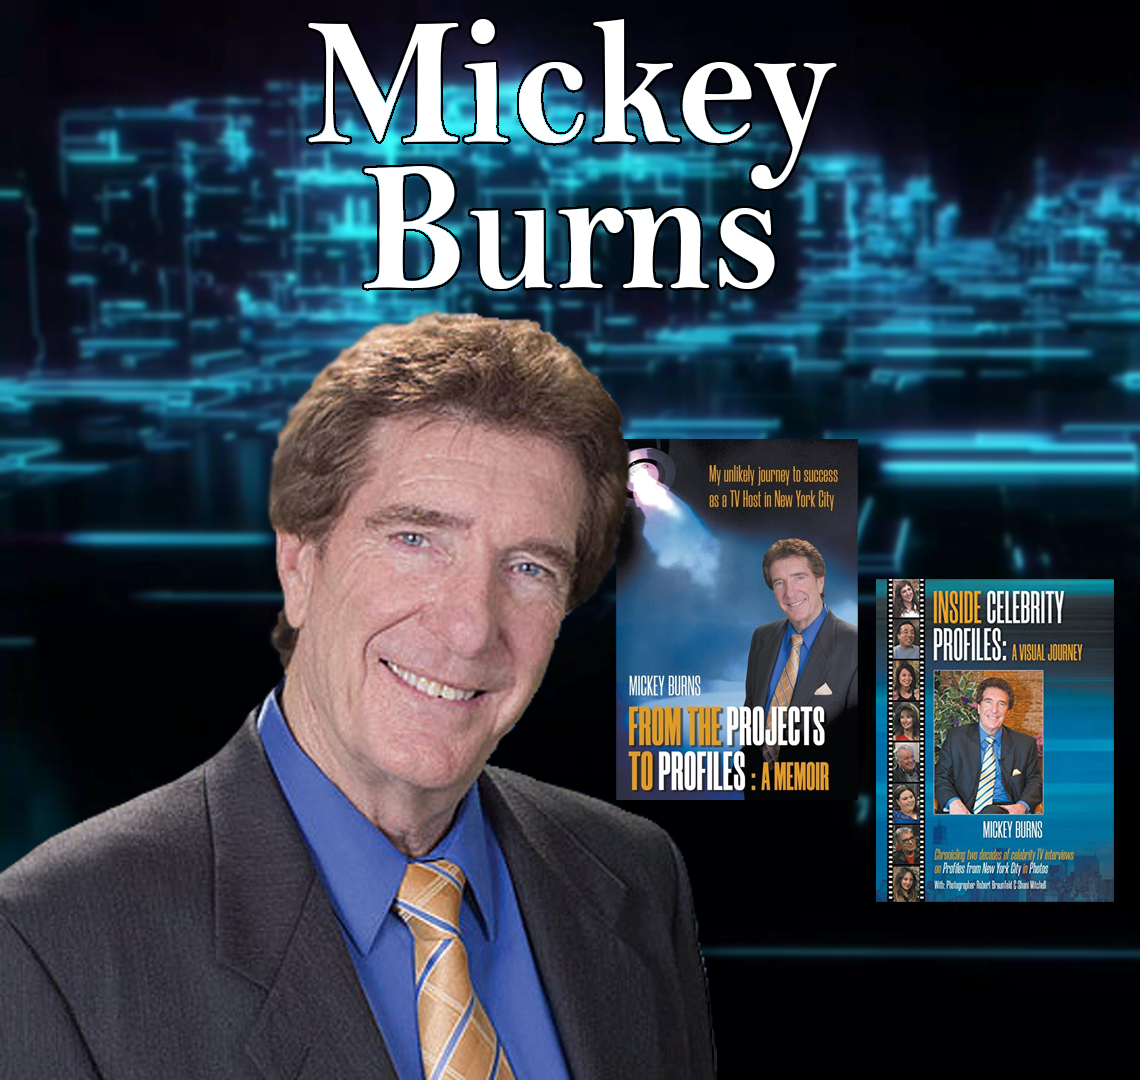 Talk Show Host/Author Mickey Burns Guests On Harvey Brownstone Interviews